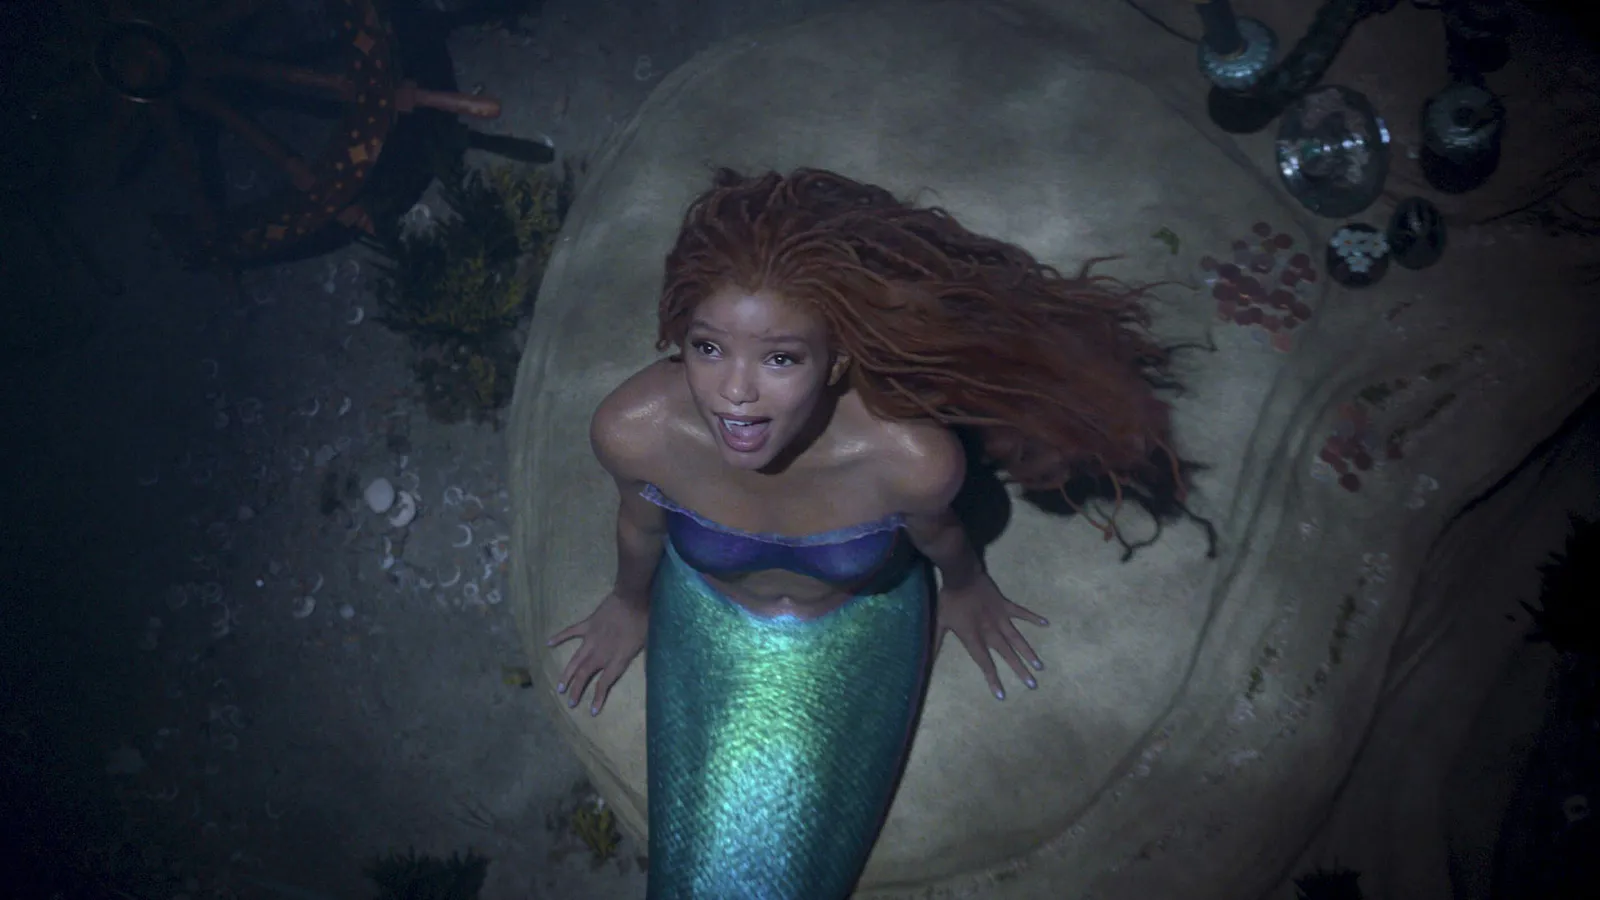 The Little Mermaid: Why are films becoming so badly-lit and difficult to see? 